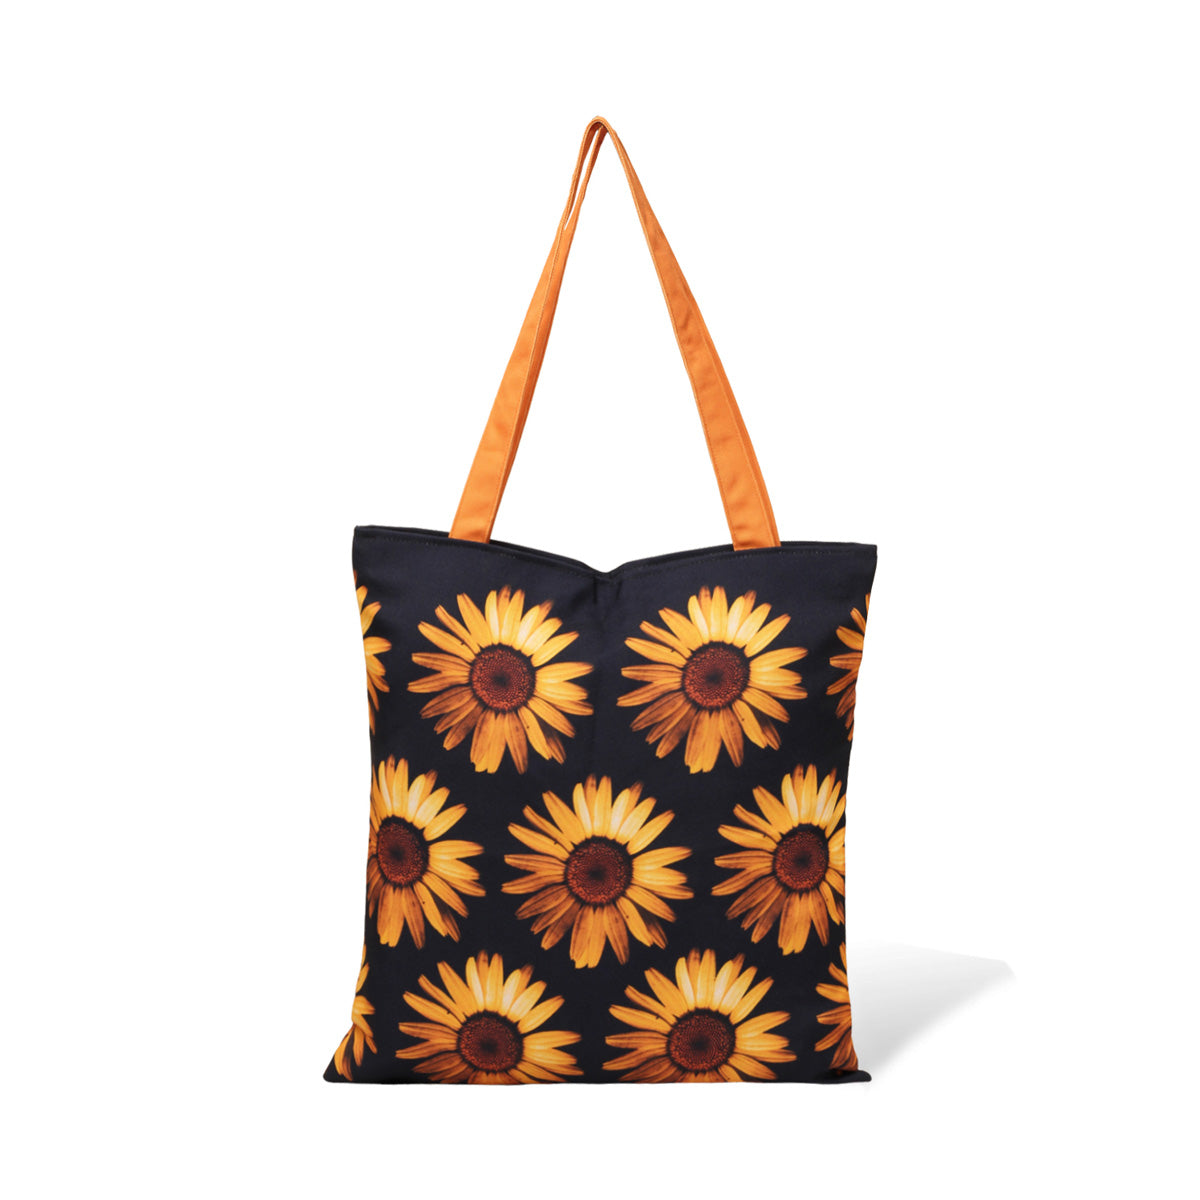 A stylish tote bag with black and orange colors, adorned with beautiful sunflowers. Perfect for adding a pop of color to your outfit!